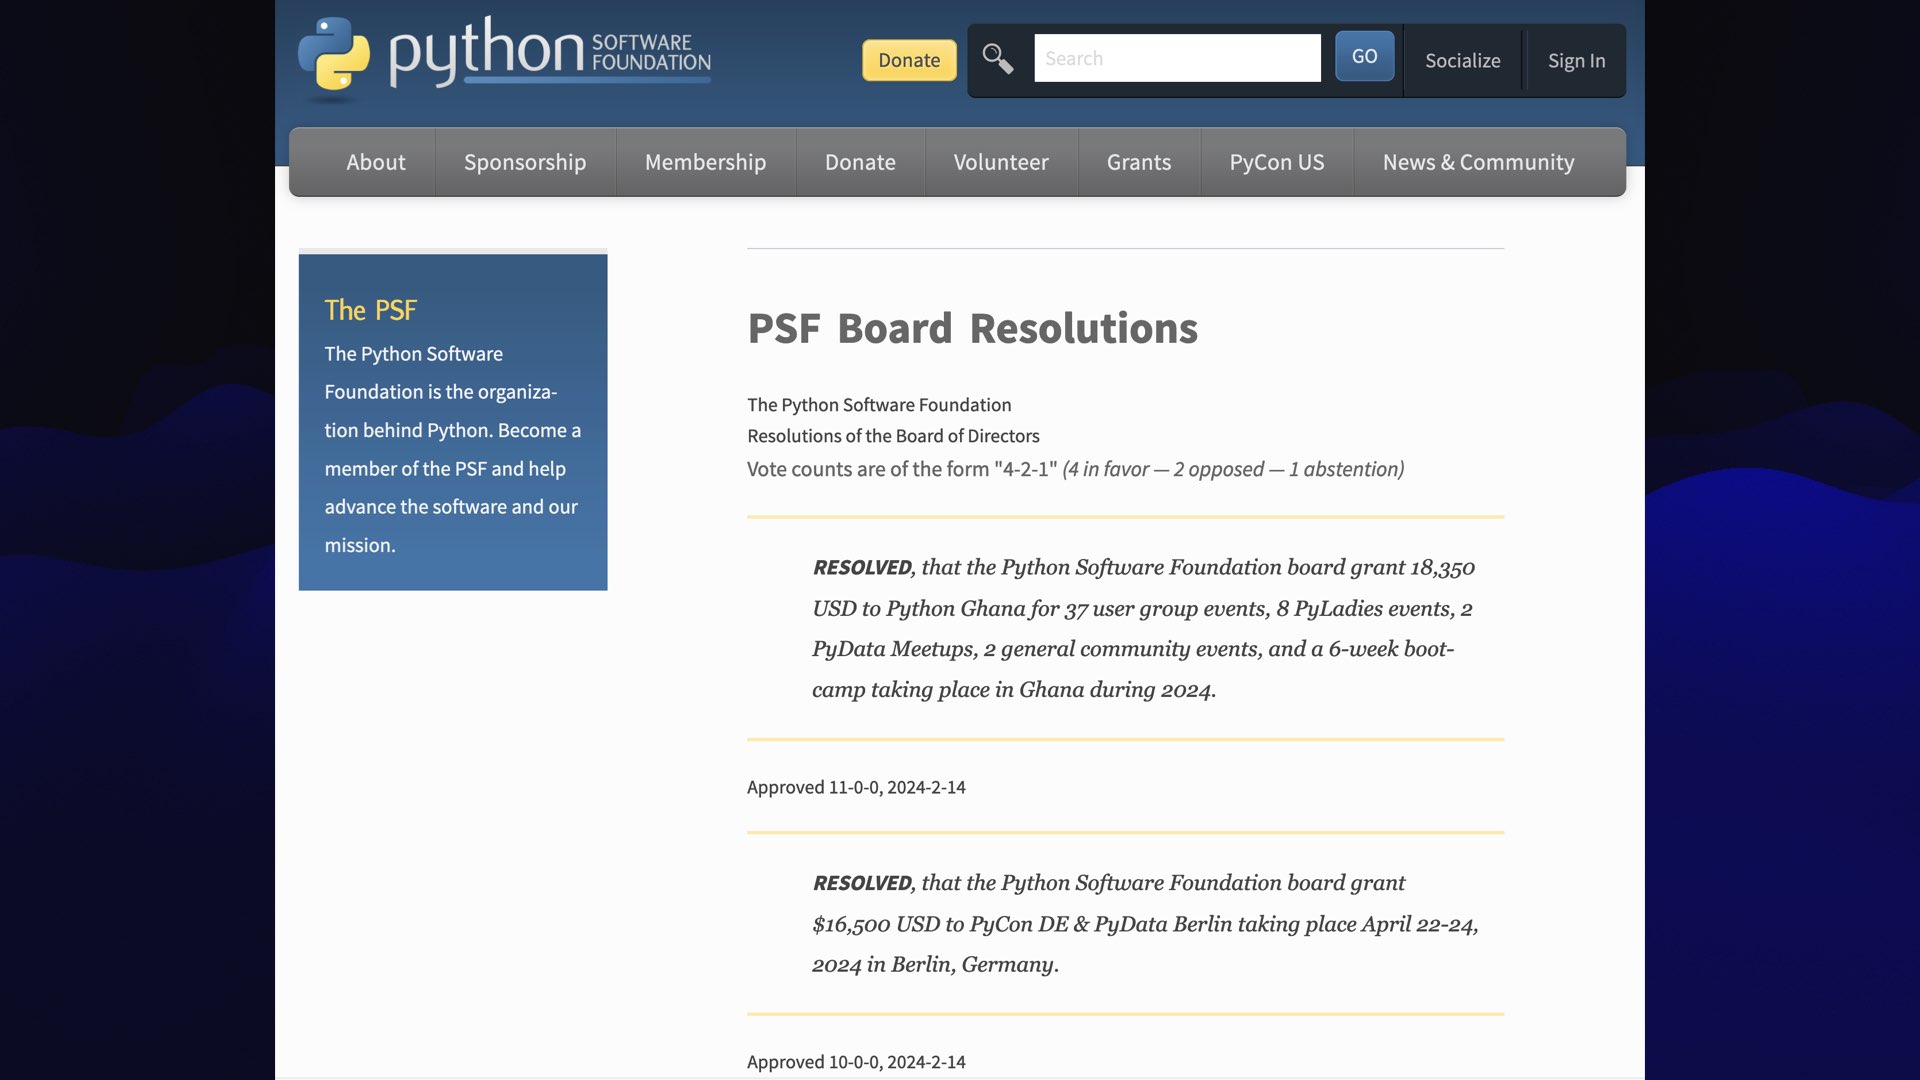 Screenshot of the PSF Board Resolutions page on the Python website.